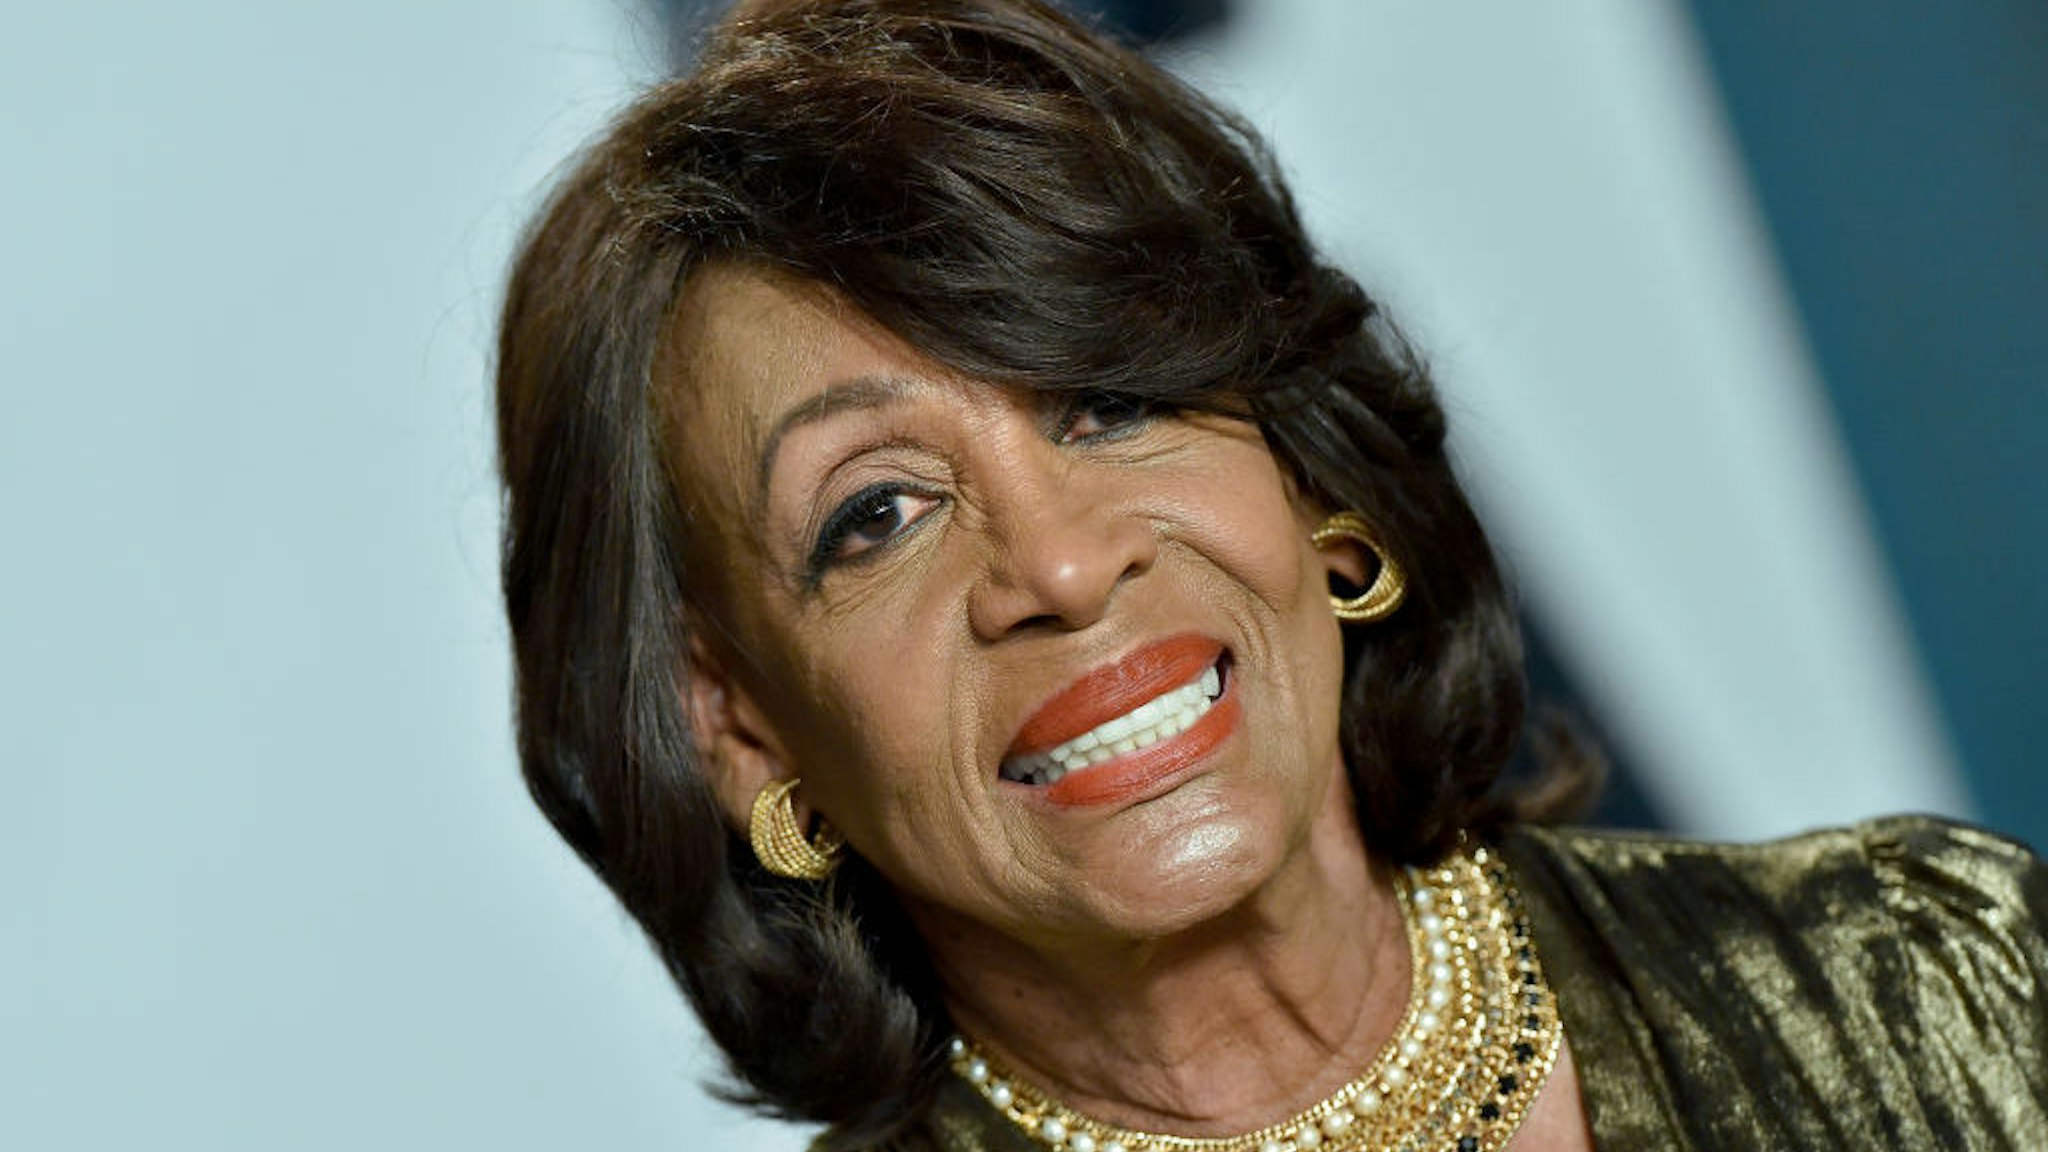 Maxine Waters attends the 2020 Vanity Fair Oscar Party hosted by Radhika Jones at Wallis Annenberg Center for the Performing Arts on February 09, 2020 in Beverly Hills, California. (Photo by Axelle/Bauer-Griffin/FilmMagic)